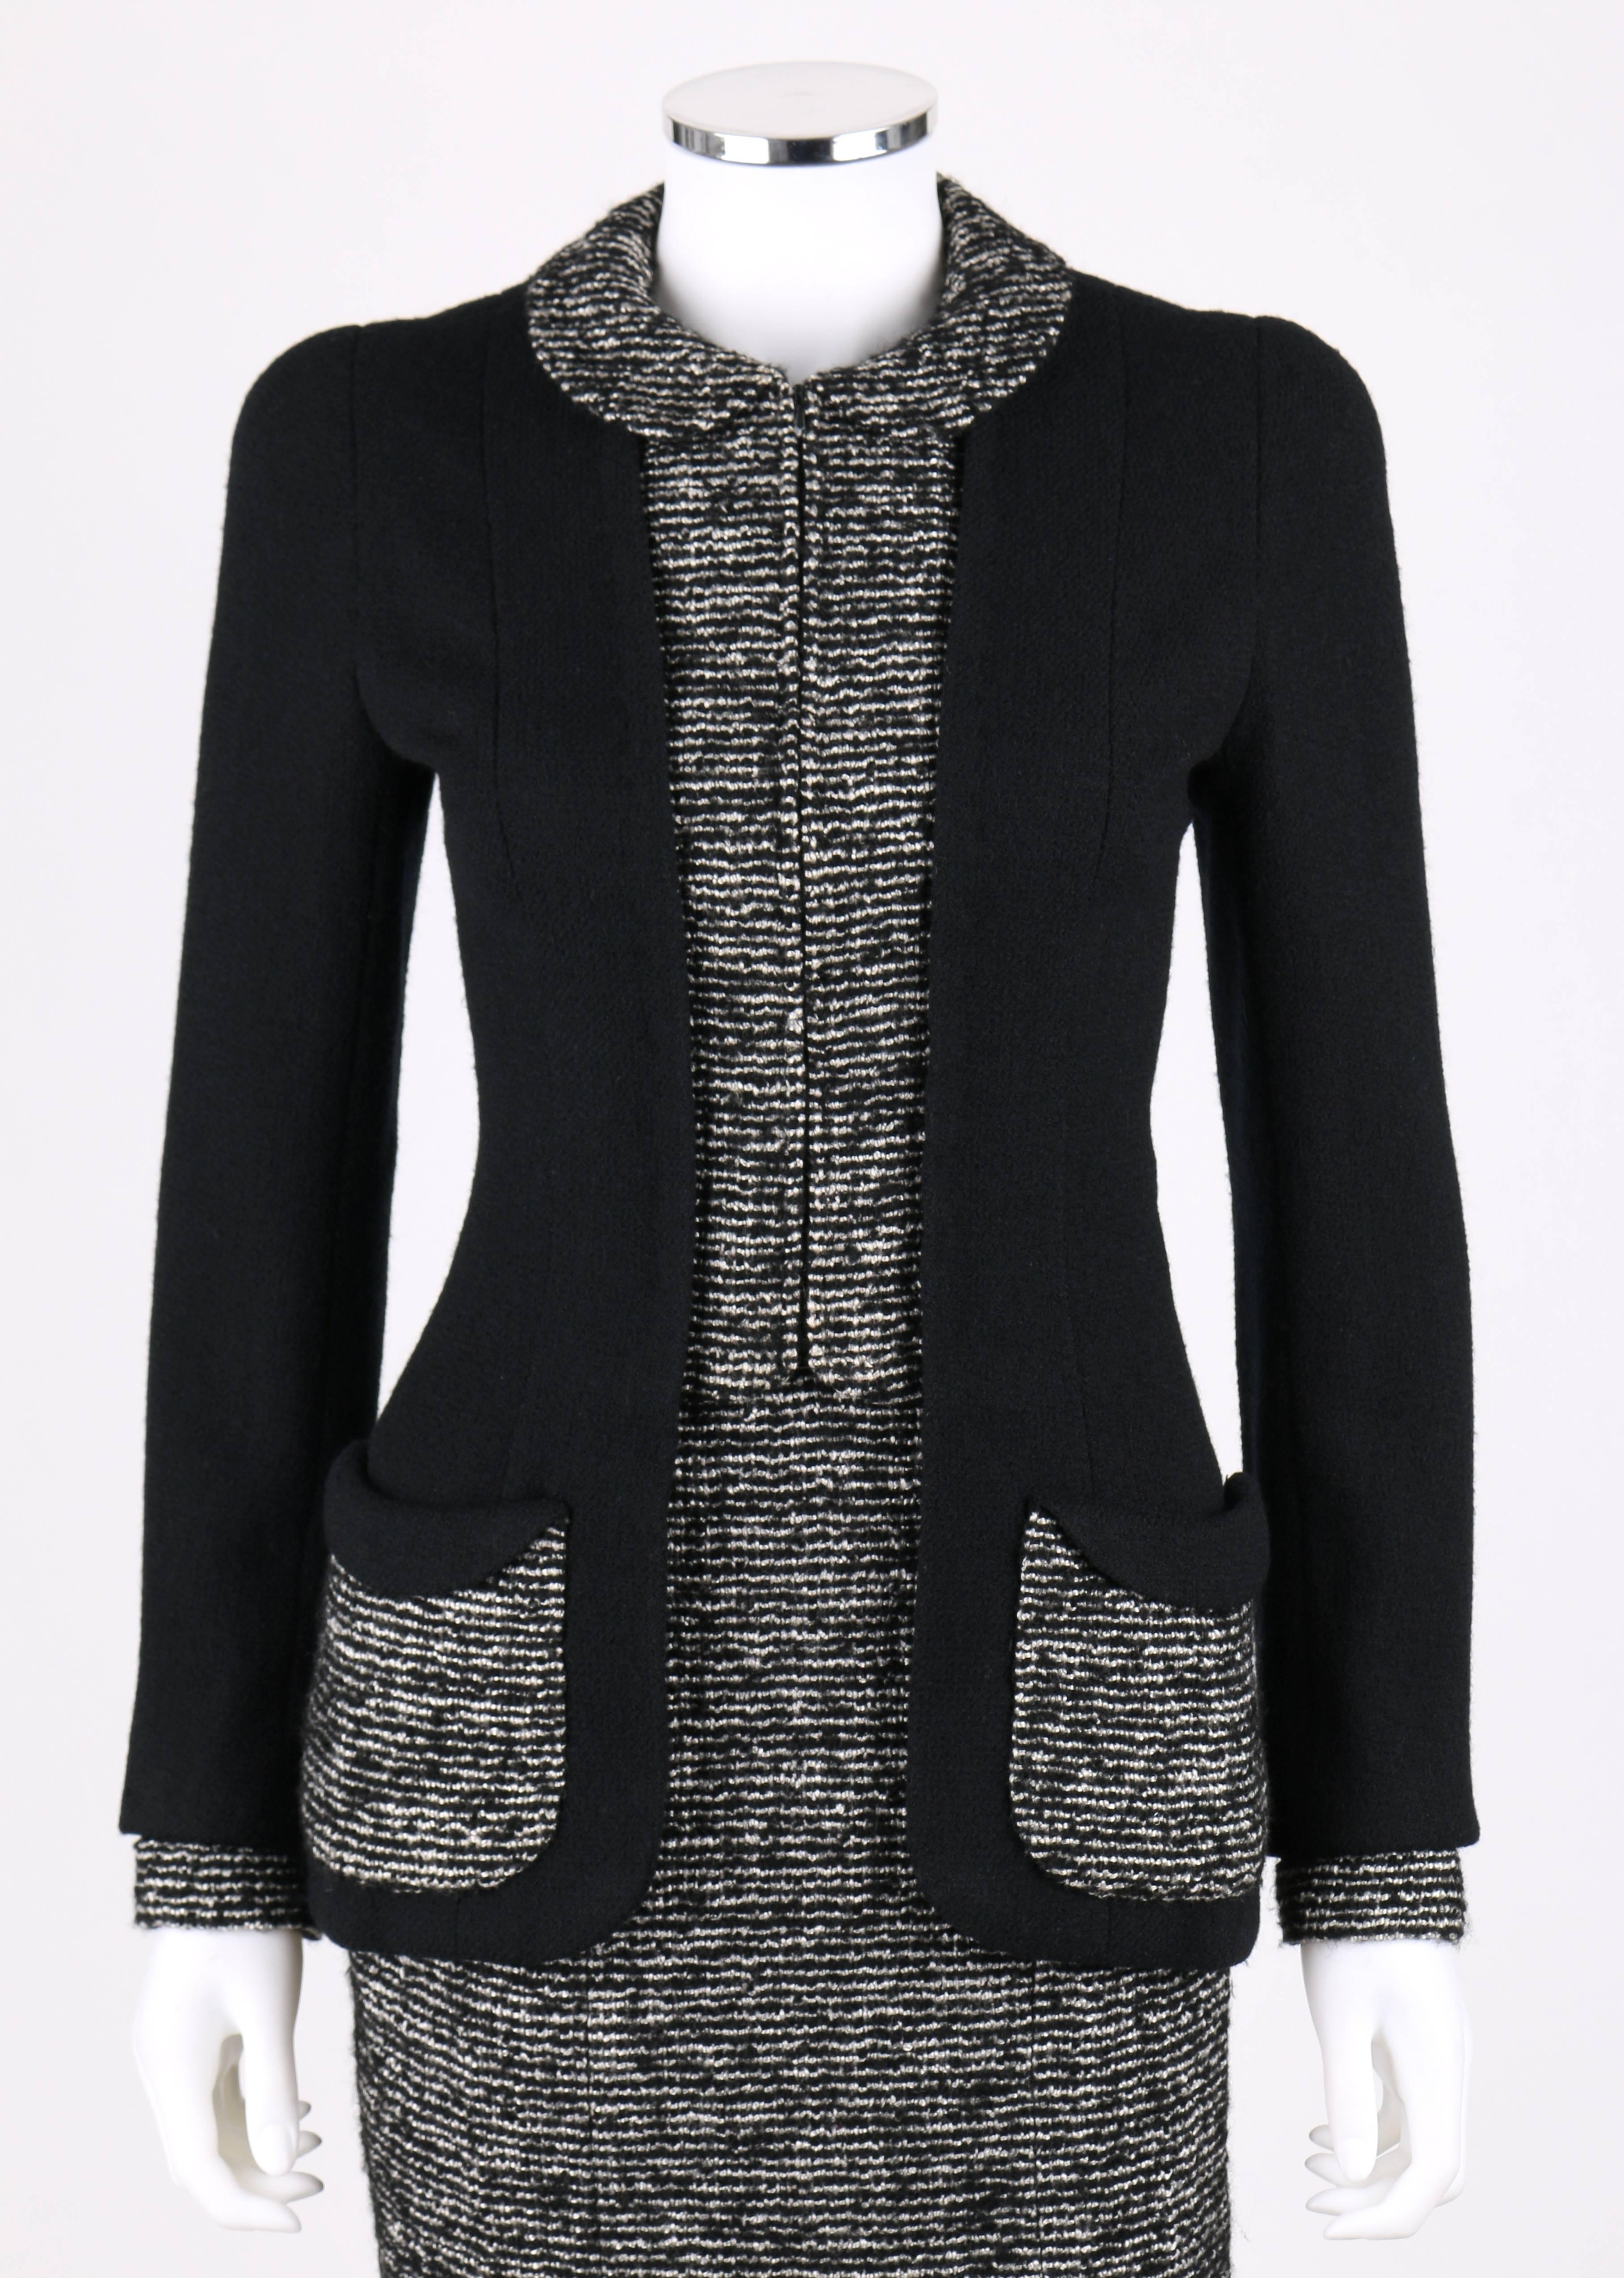 Chanel A/W 1993 Haute Couture numbered (71270 and 71271) black and white wool skirt suit. Designed by Karl Lagerfeld. Classic CHANEL. Black wool jacket is accented in black and white striped boucle wool. Two front rounded patch pockets with flap.